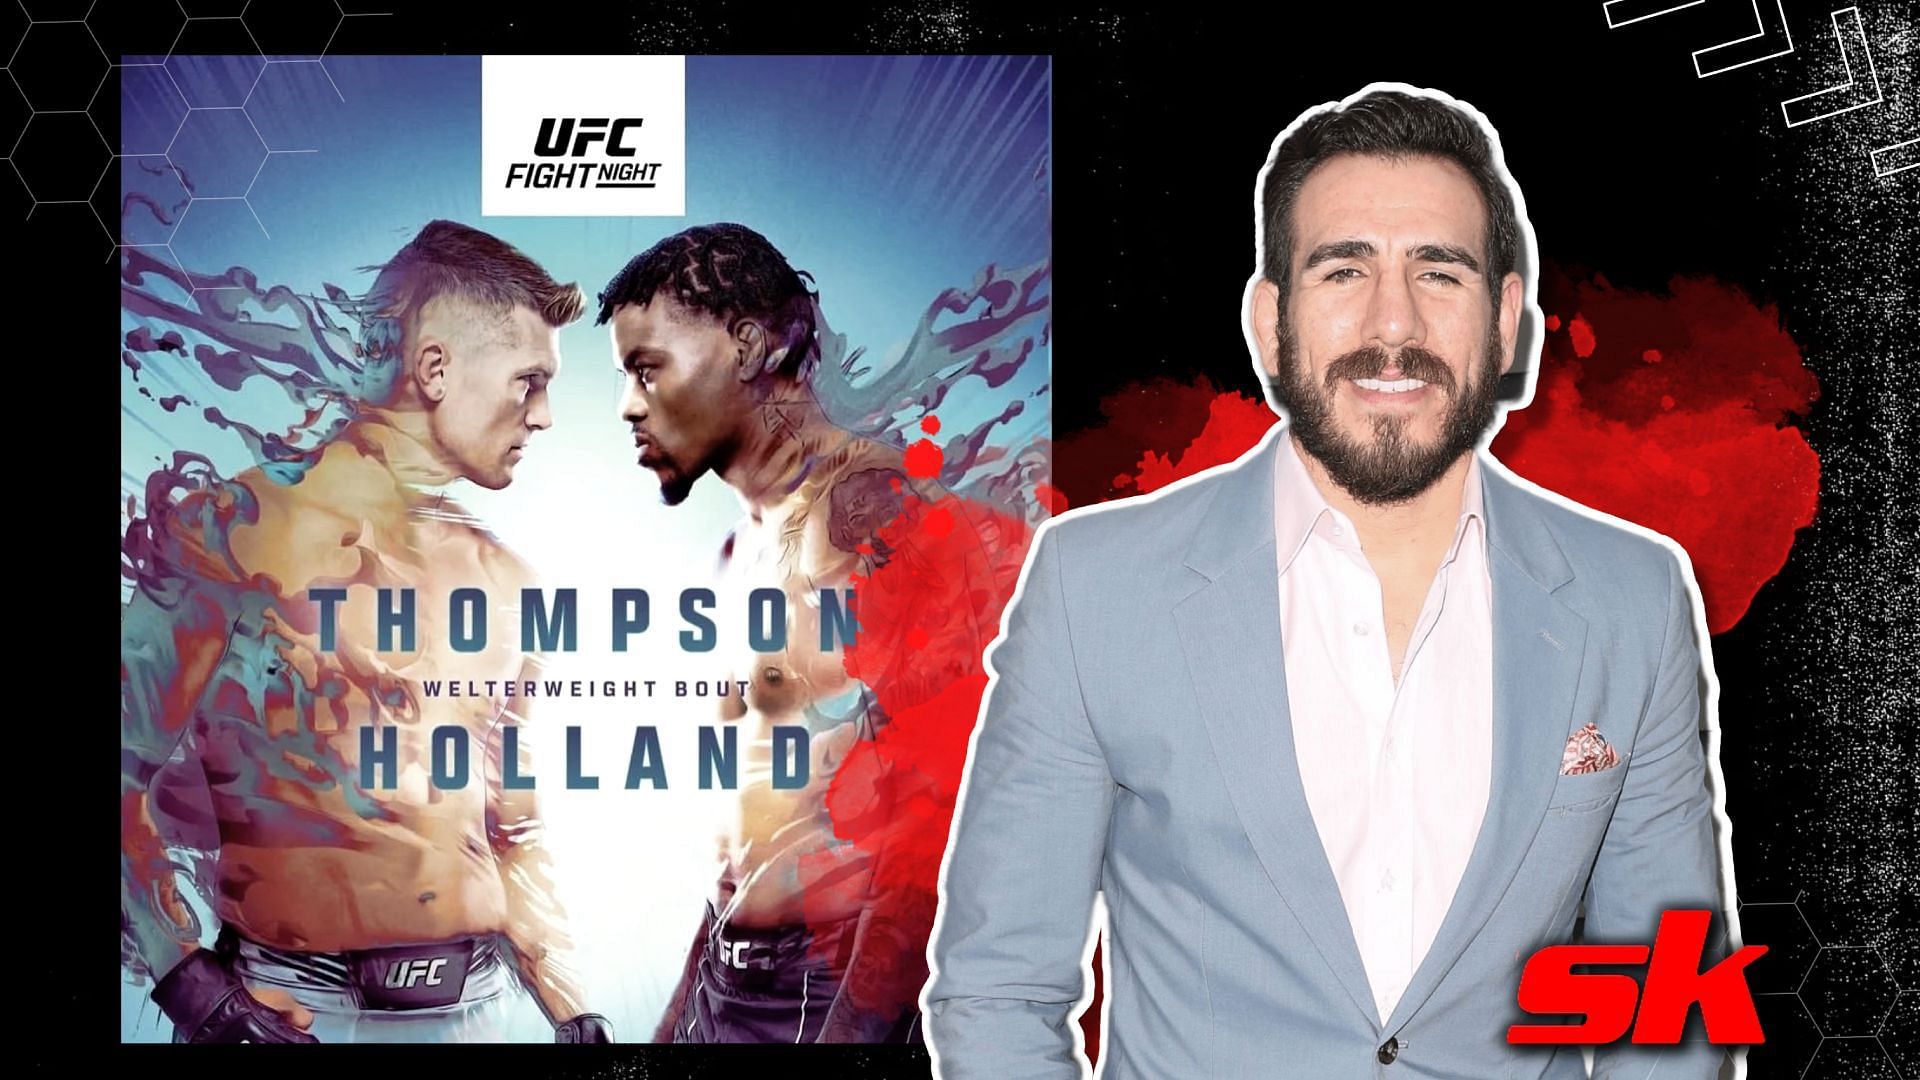 Kevin Holland might have a tough time against Stephen Thompson, explains Kenny Florian. [Image credits: @wonderboymma on Instagram; Getty Images]